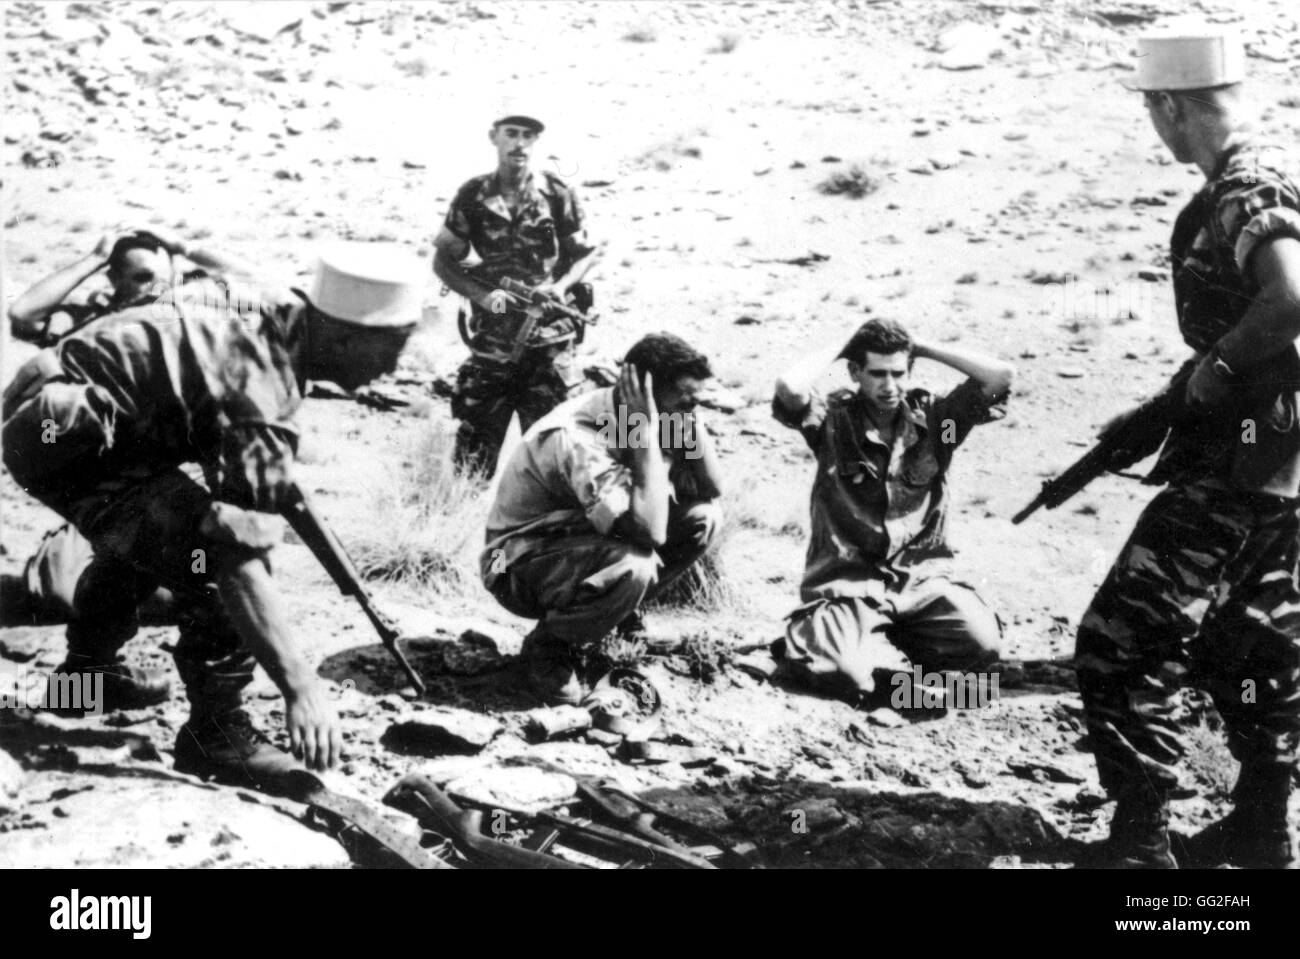 F.L.N. (National Liberation Front) prisoners captured by the Foreign Legion 1954 - 1962 France - Algerian War of Independence Stock Photo